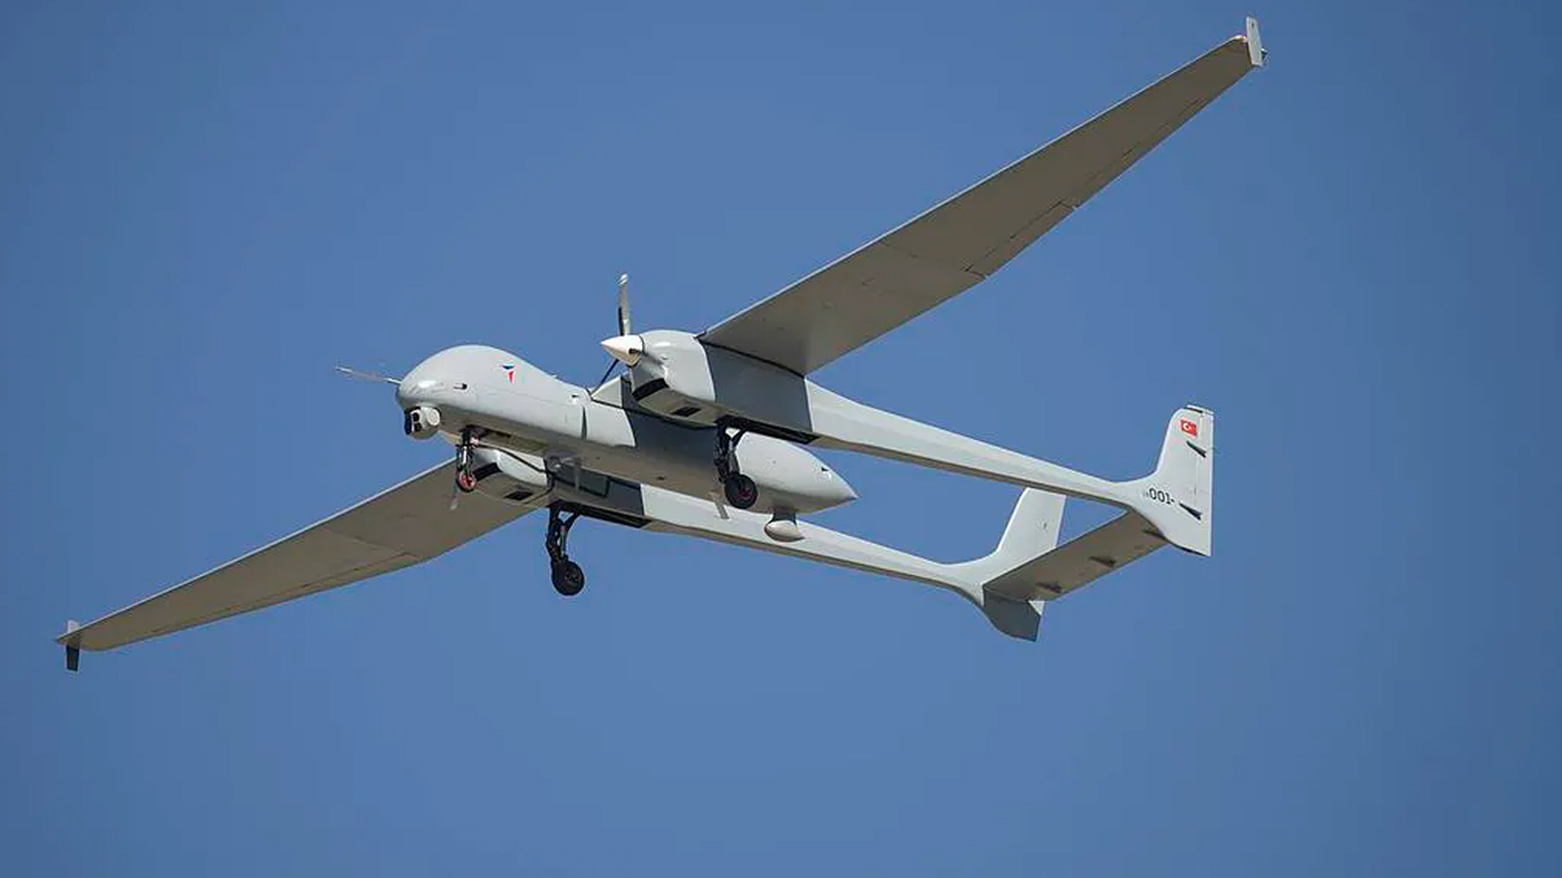 A Turkish Medium Altitude Long Endurance (MALE) drone is pictured in operation. (Photo: Turkish Aerospace)